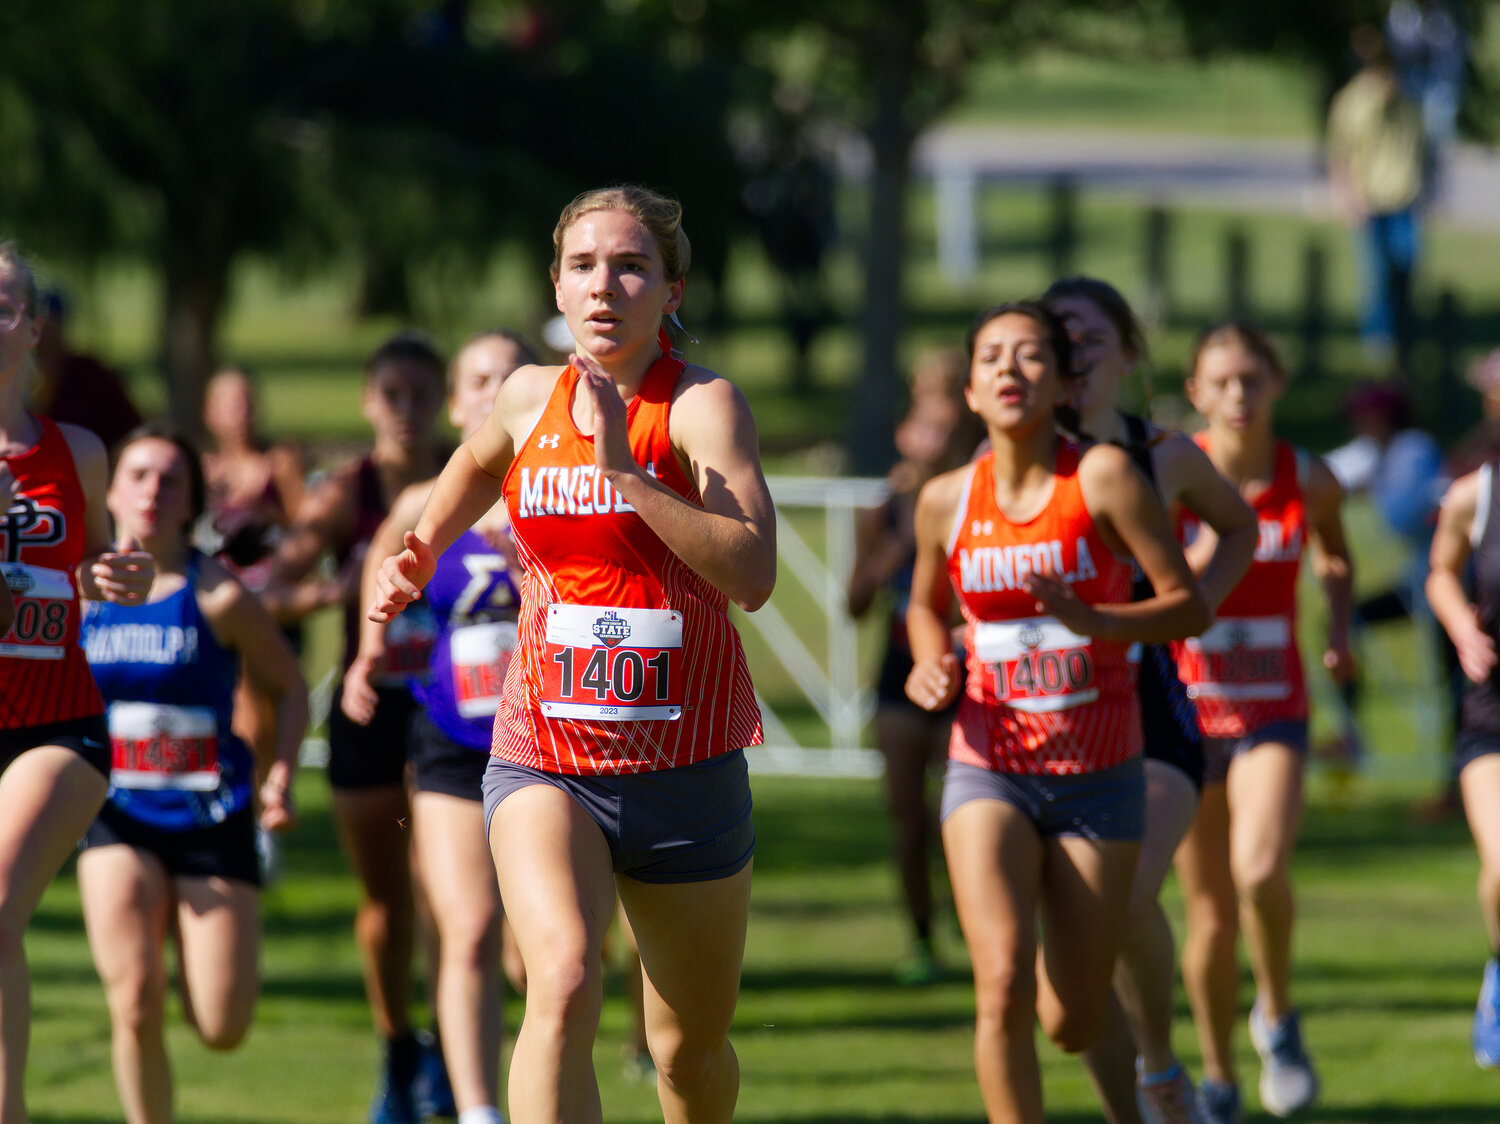 Raylie Peebles of Mineola in the home stretch at the state meet.